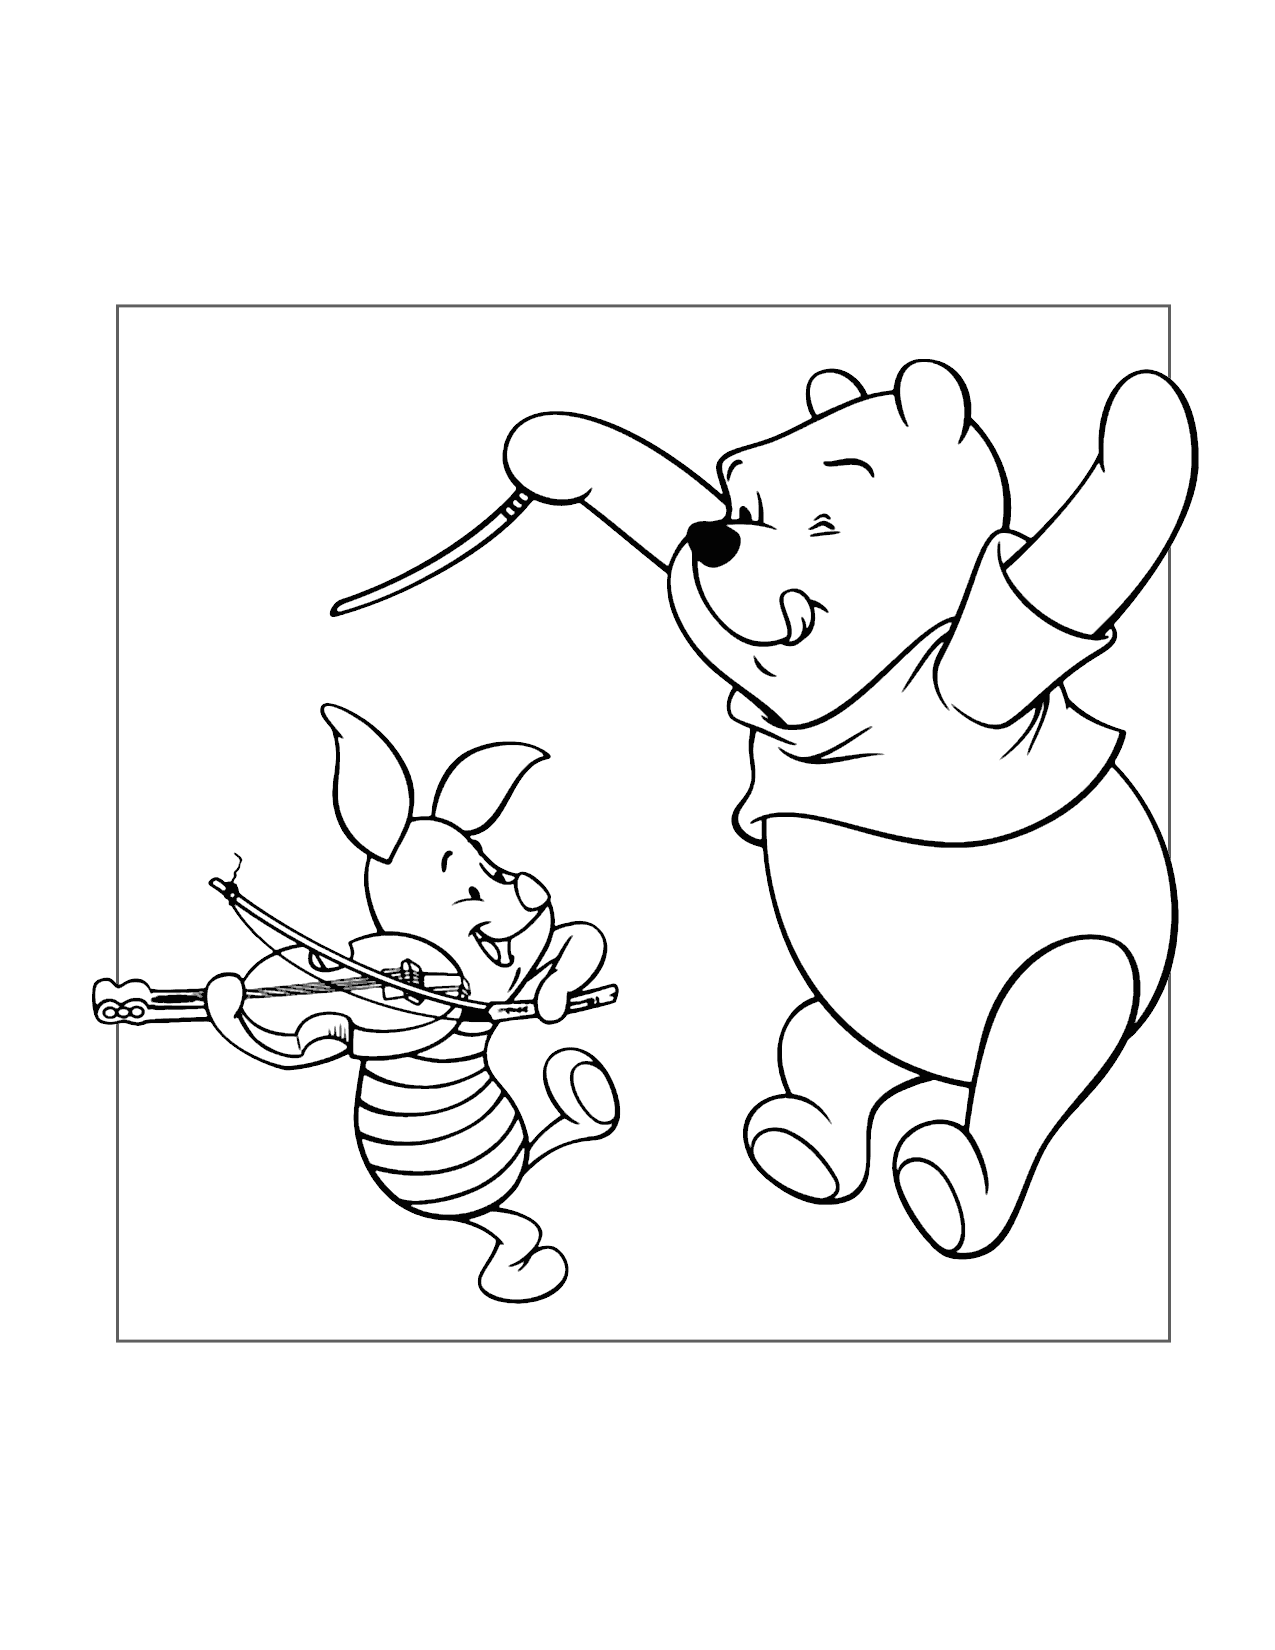 Pooh And Piglet Make Music Coloring Page